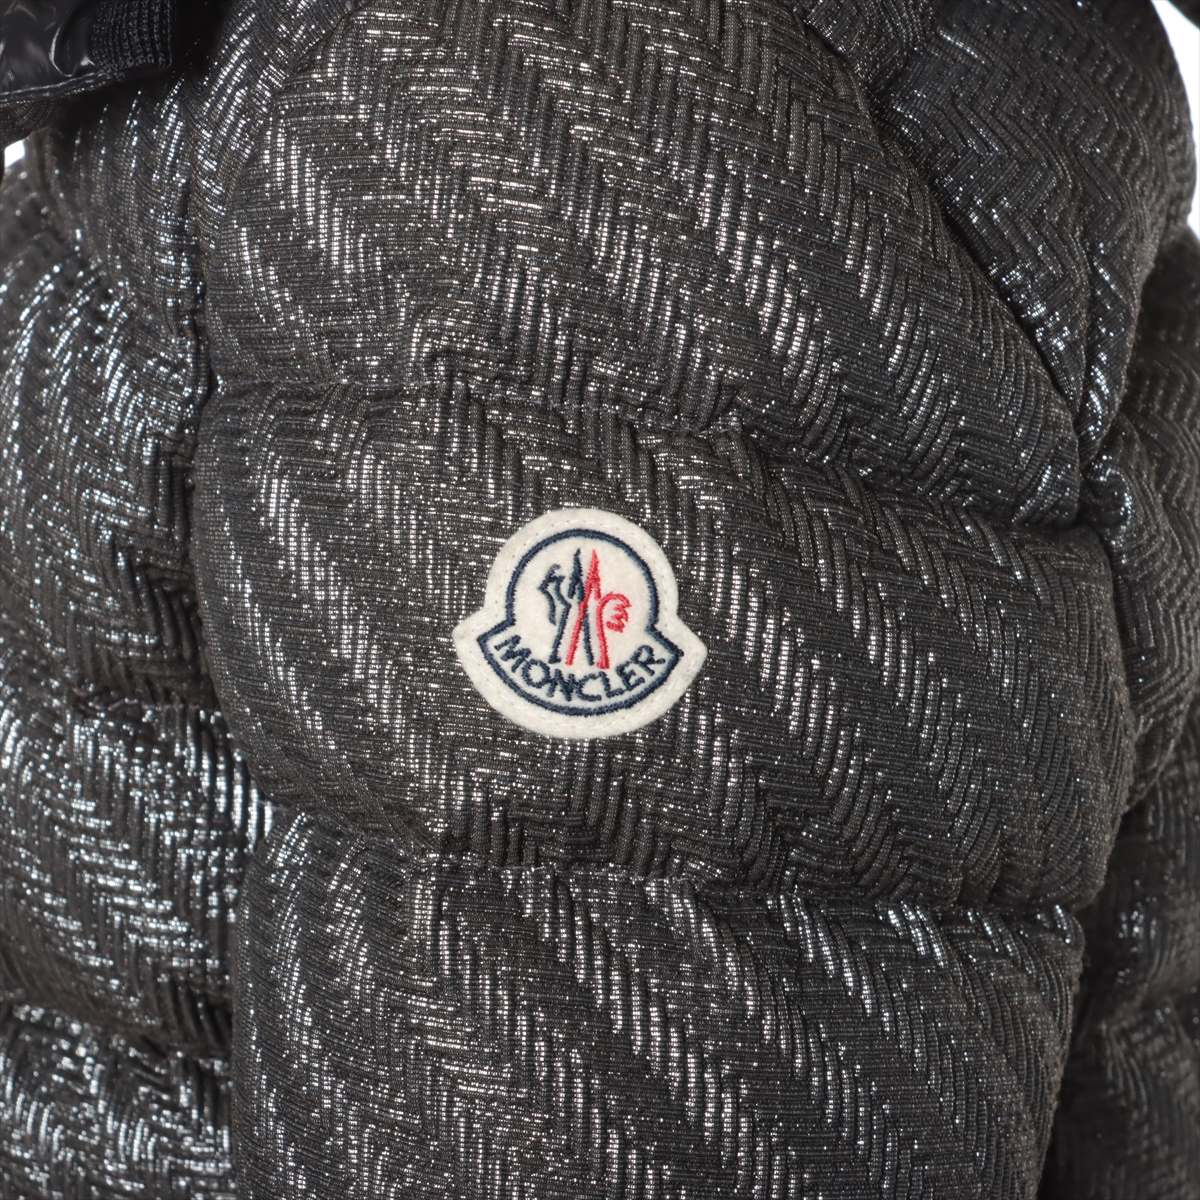 Moncler BADYF 16 years Cotton & polyester Down jacket 2 Ladies' Silver  Removable hood